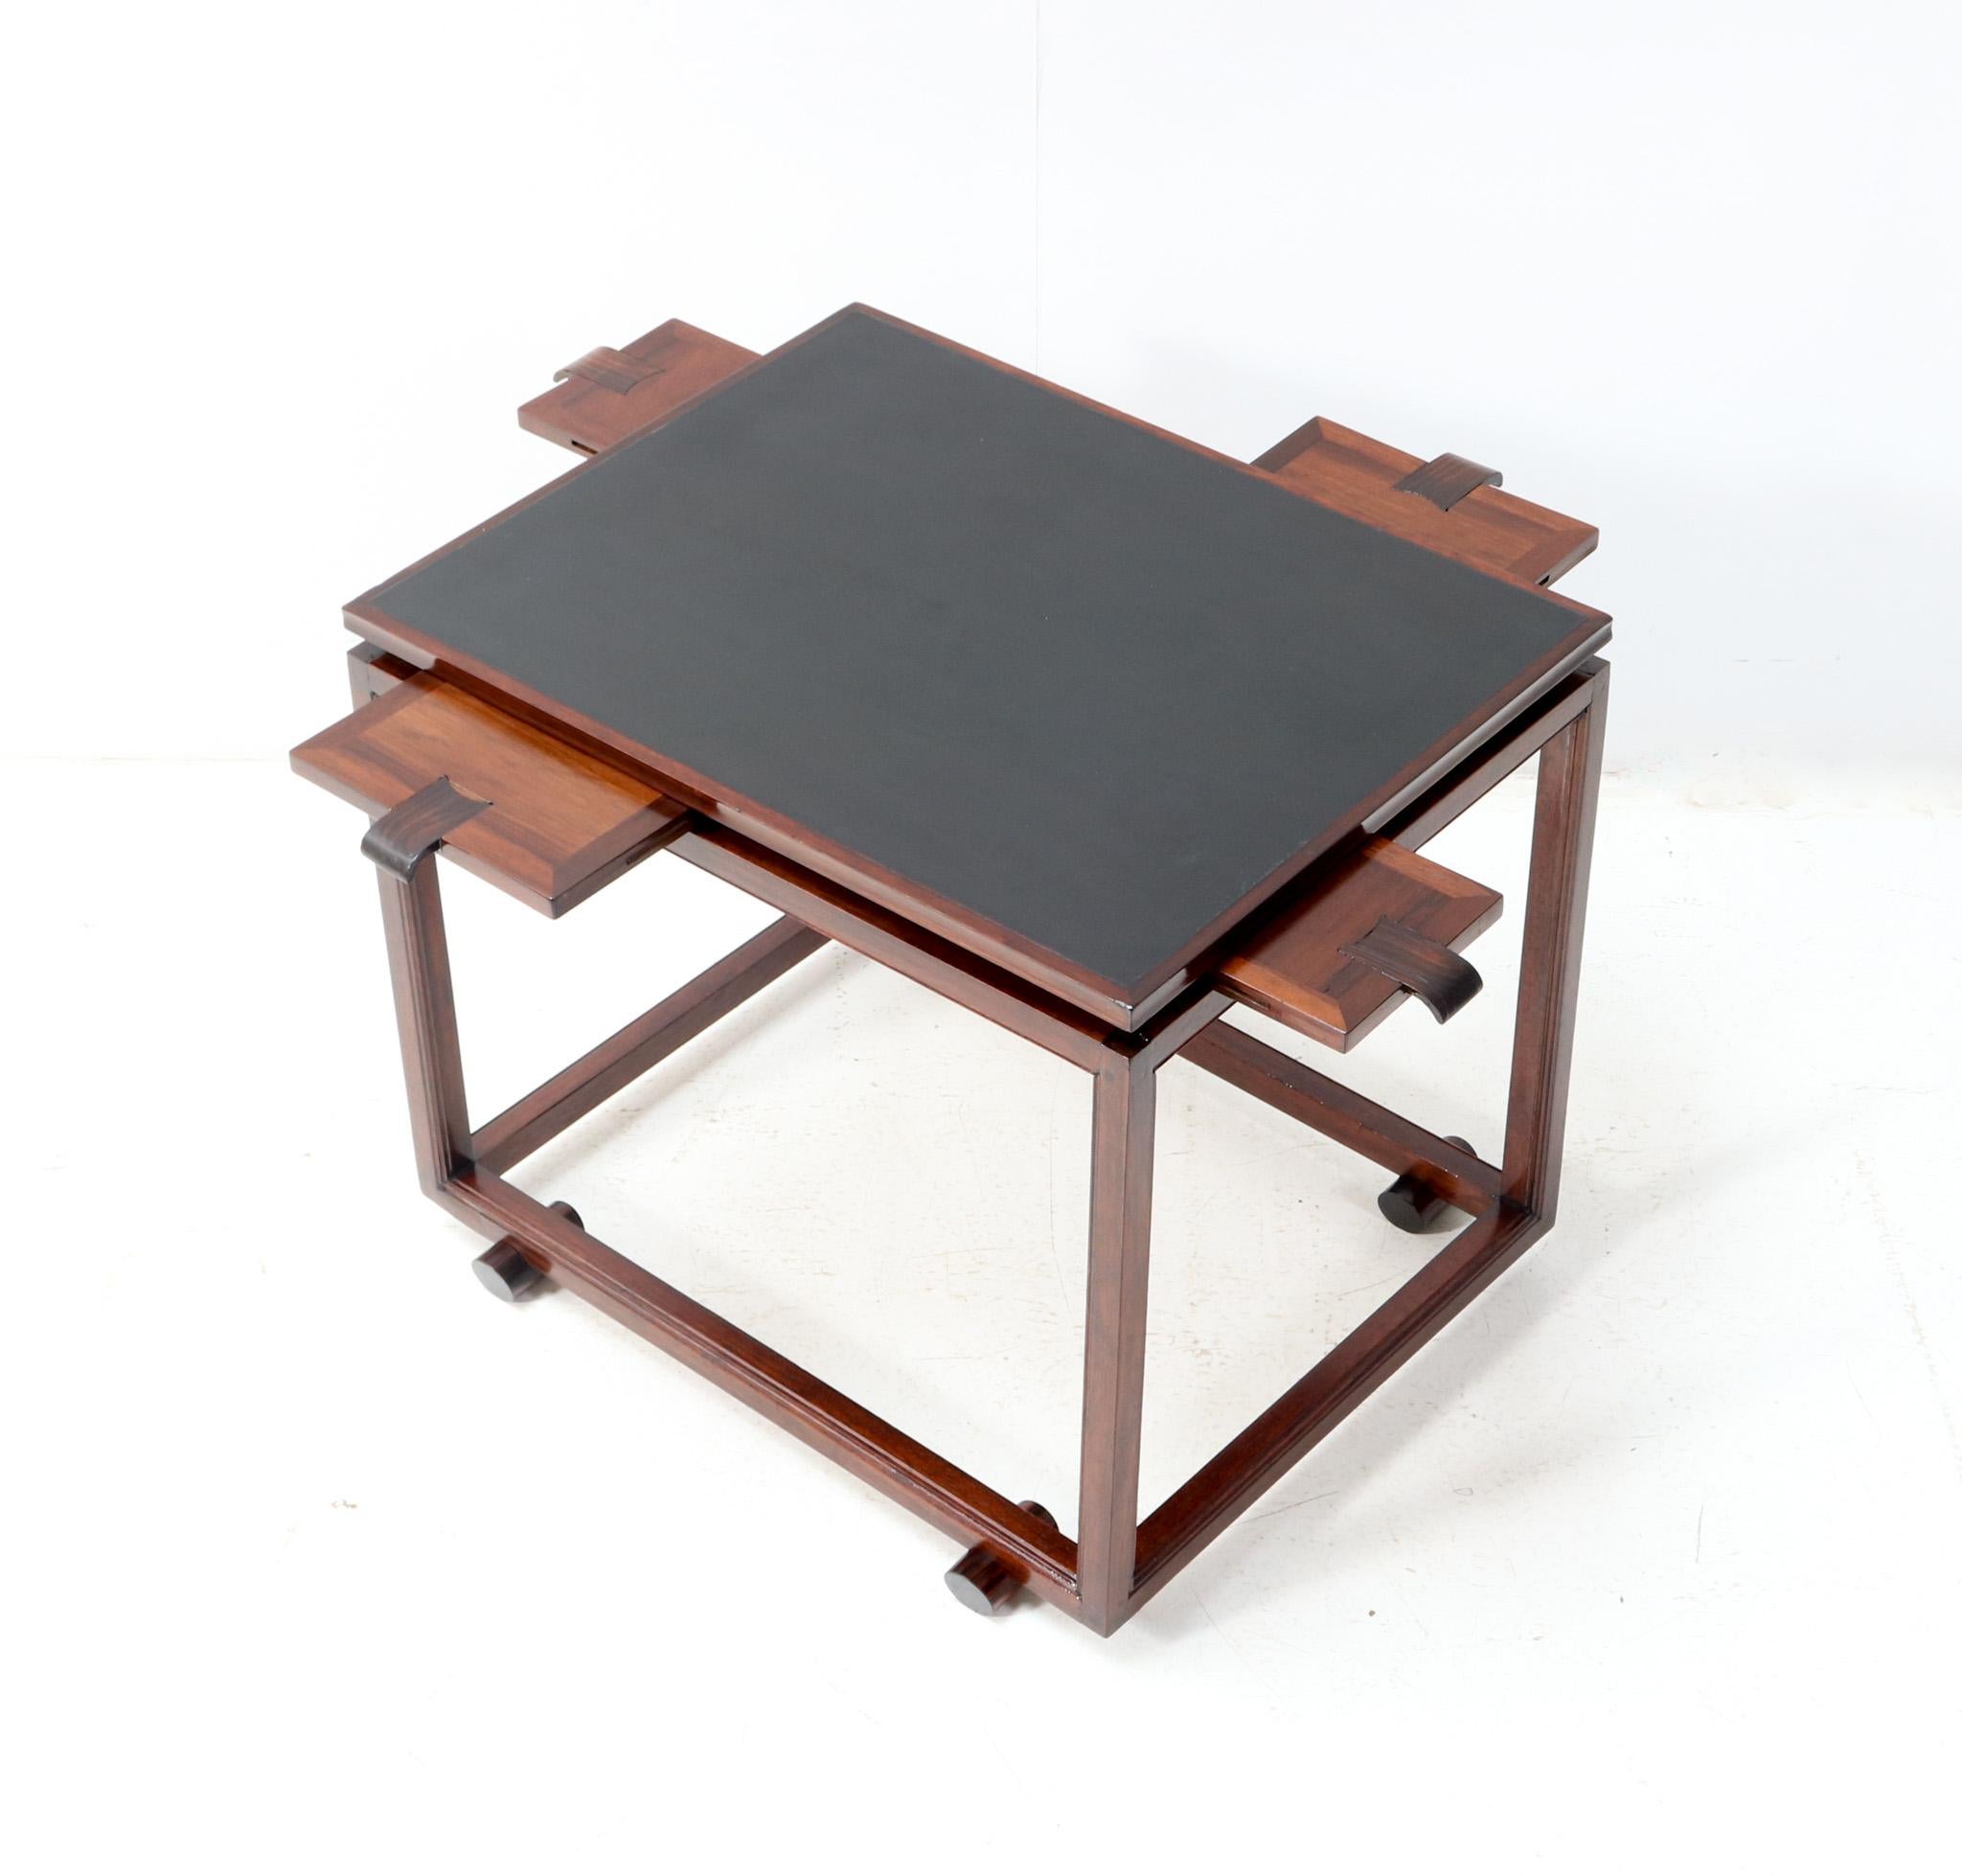 Magnificent and ultra rare Art Deco Modernist game table.
Striking Dutch design from the 1920s.
Solid walnut base with original black faux leather top.
Four original pull-out shelves with original macassar ebony handles.

In very good refinished